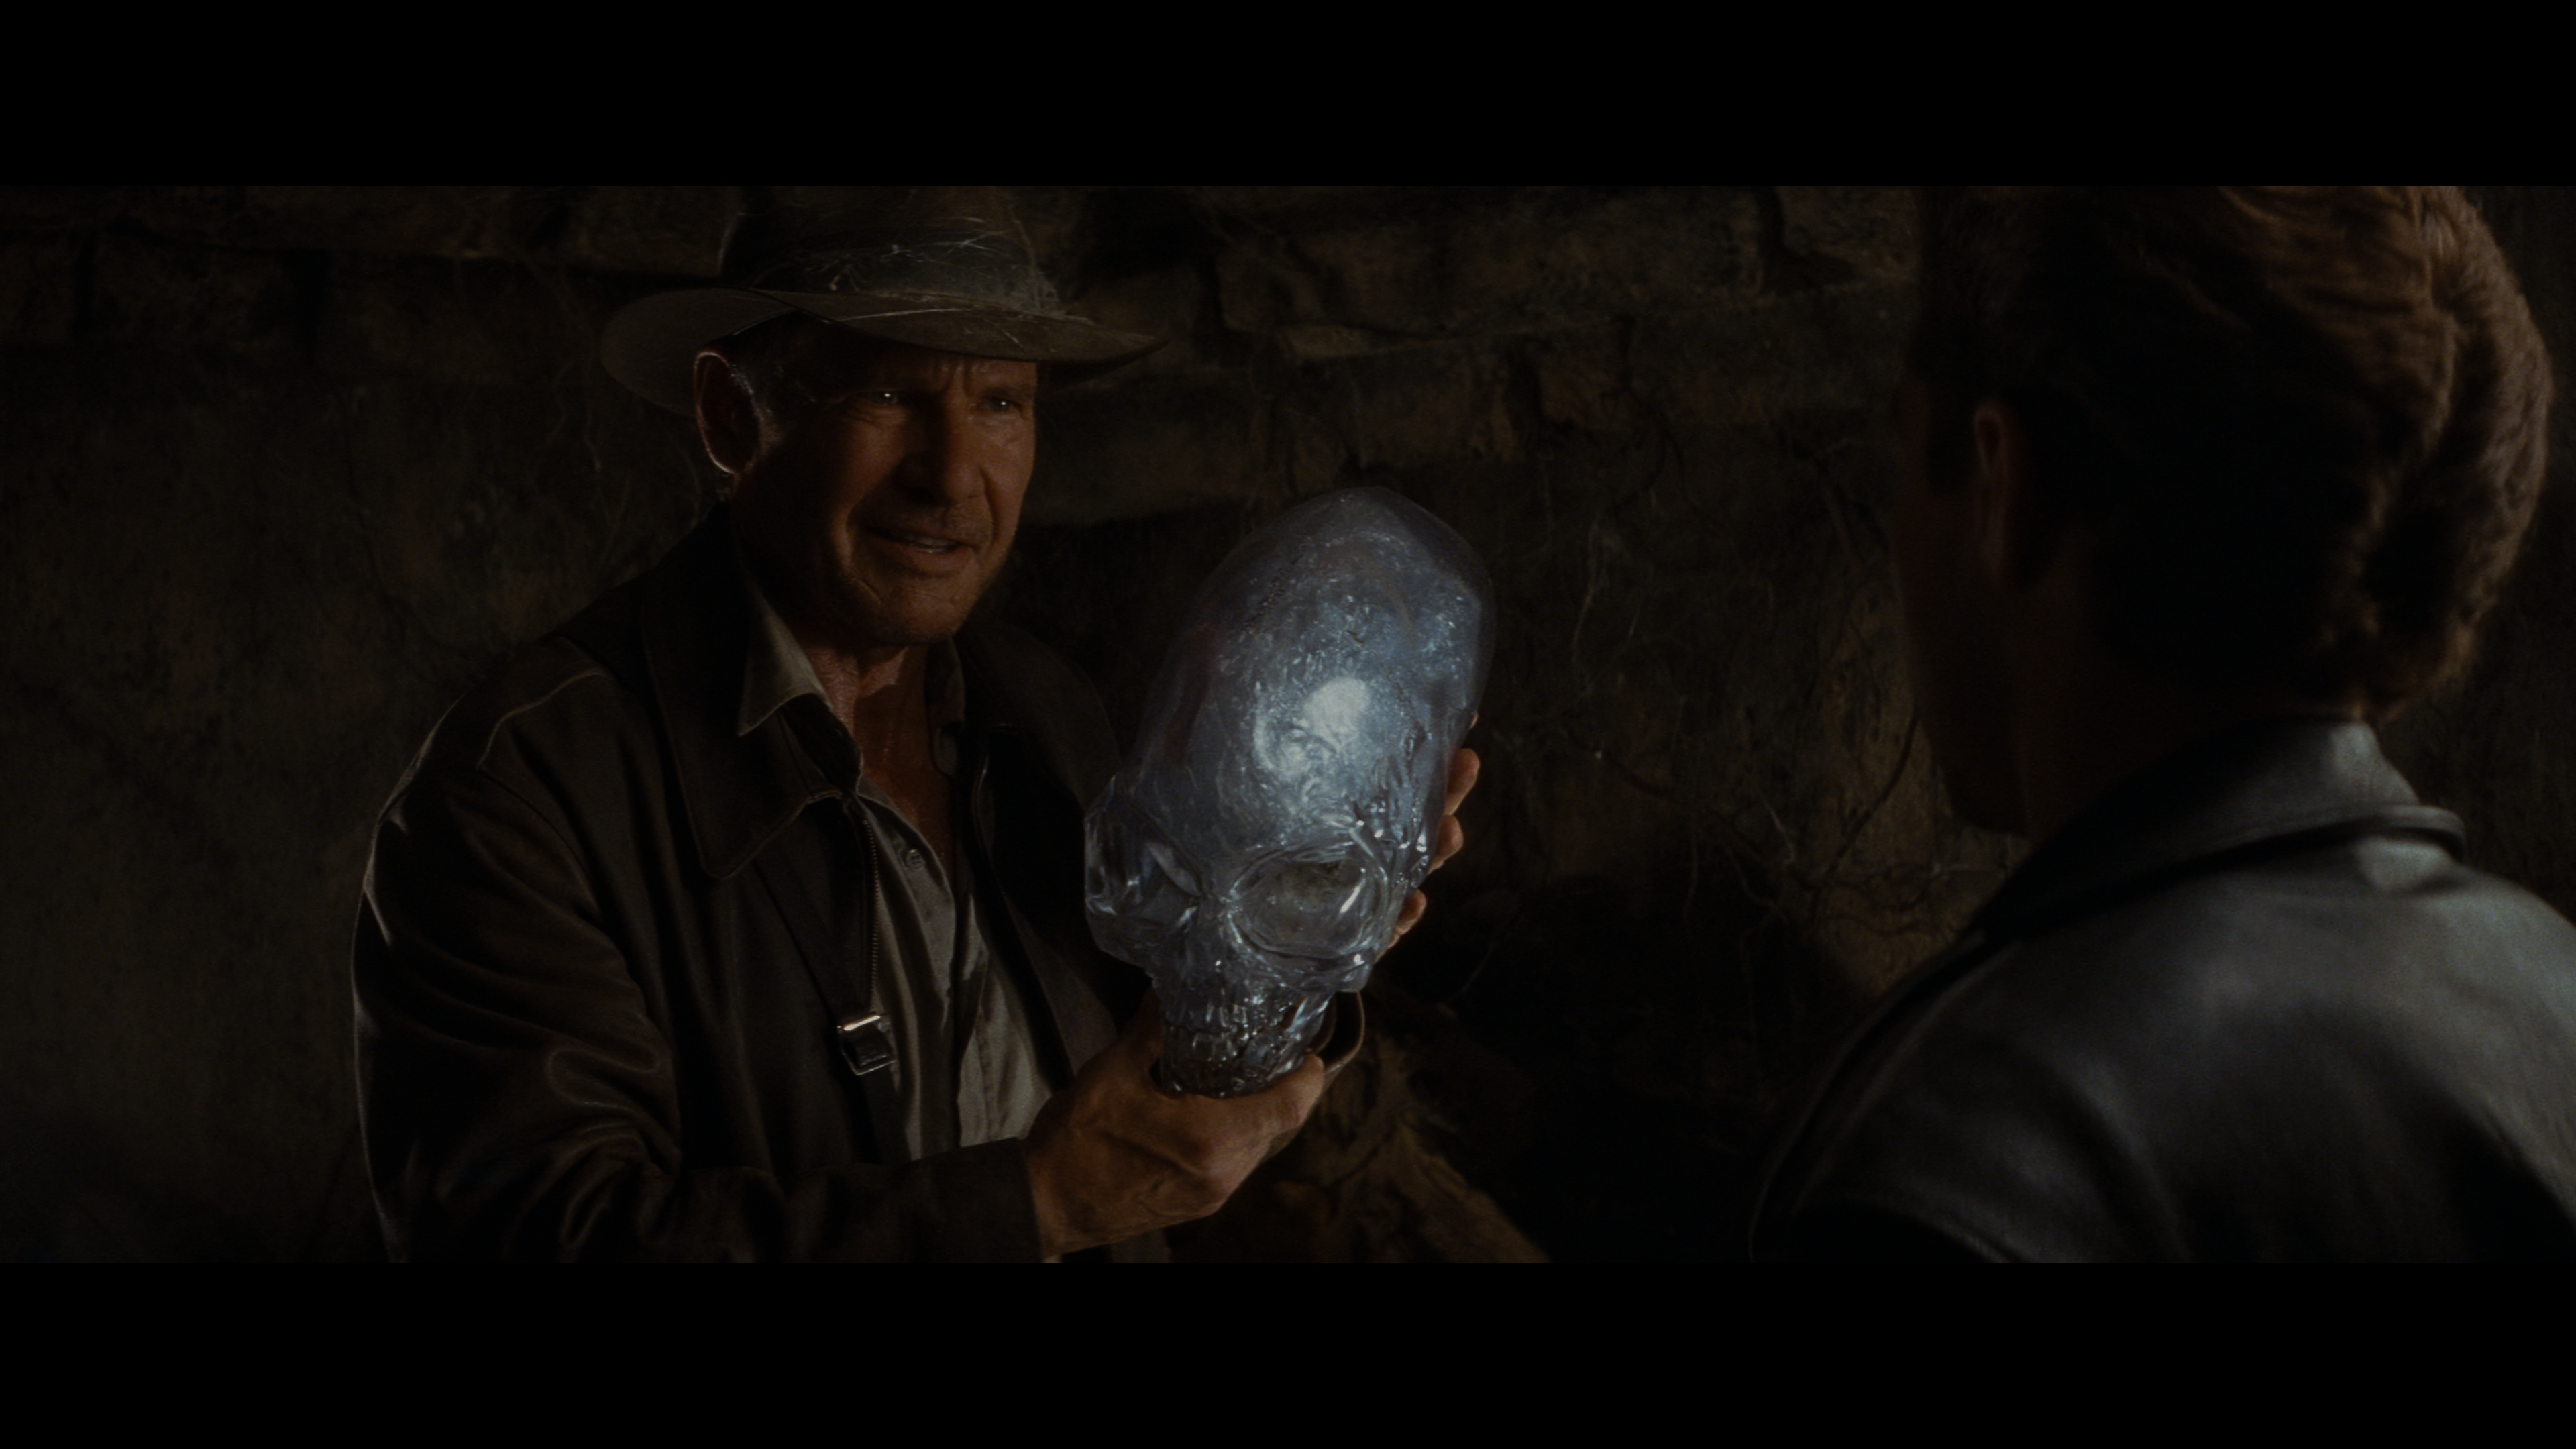 Indiana Jones and the Kingdom of the Crystal Skull (2008) Blu-ray Review